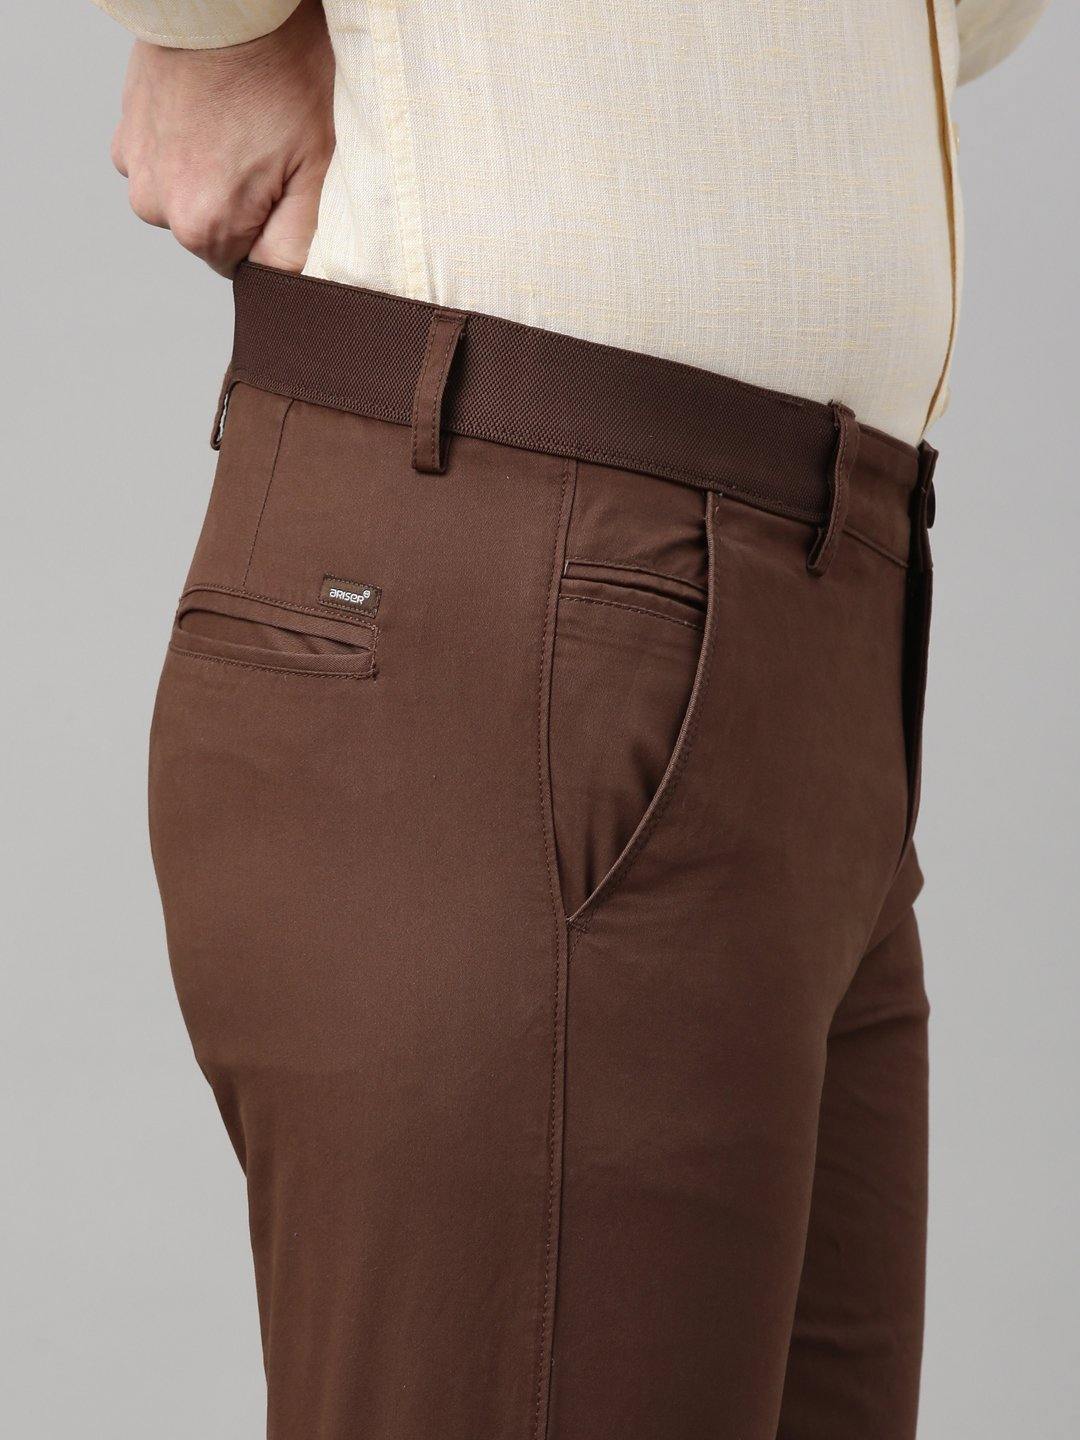 Dcot by Donear Mens Brown Cotton Trousers